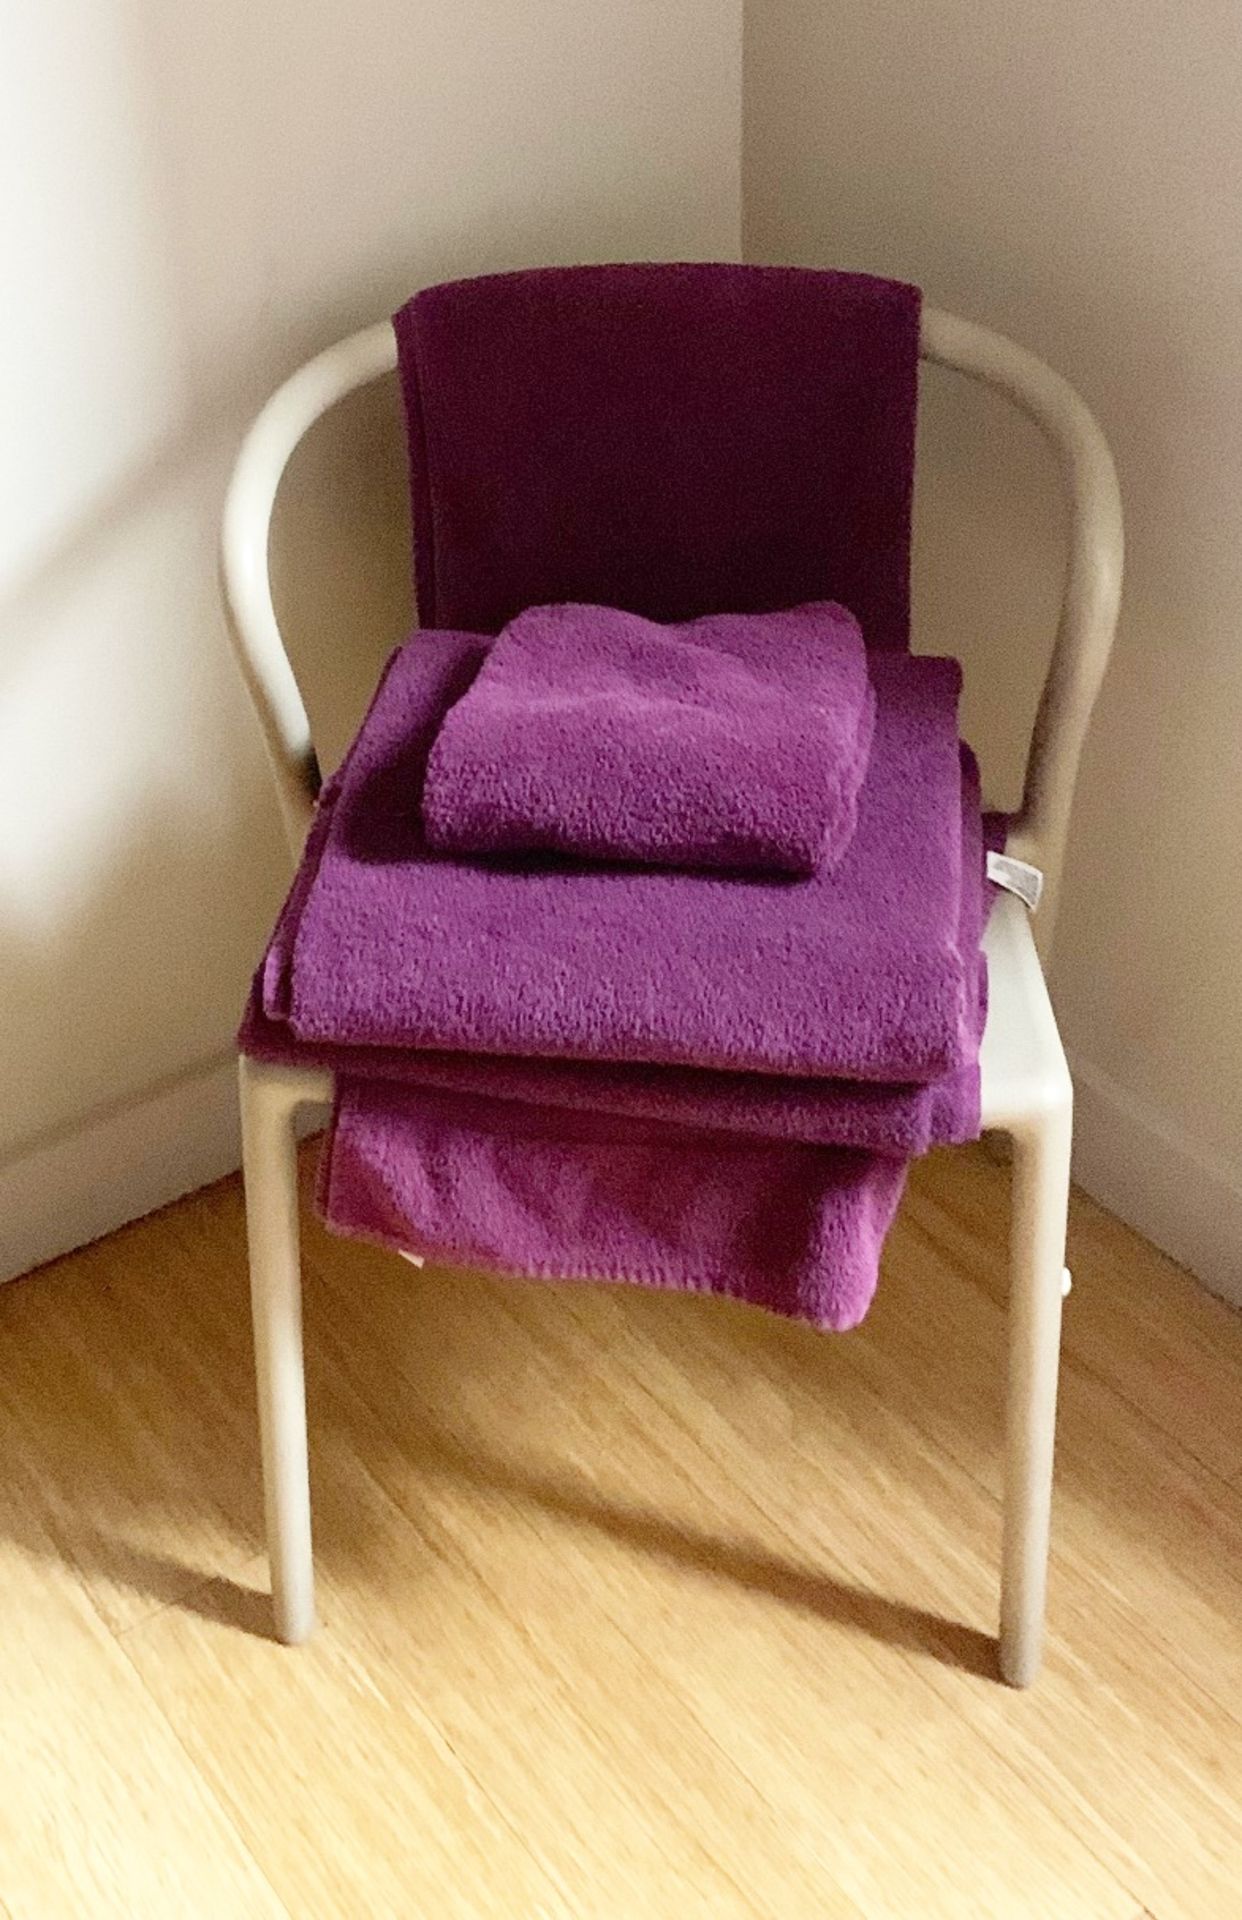 50 x Majestic Luxury 620gsm Bath Towels in Purple - Sizes Include Large, Medium and Small - - Image 2 of 4